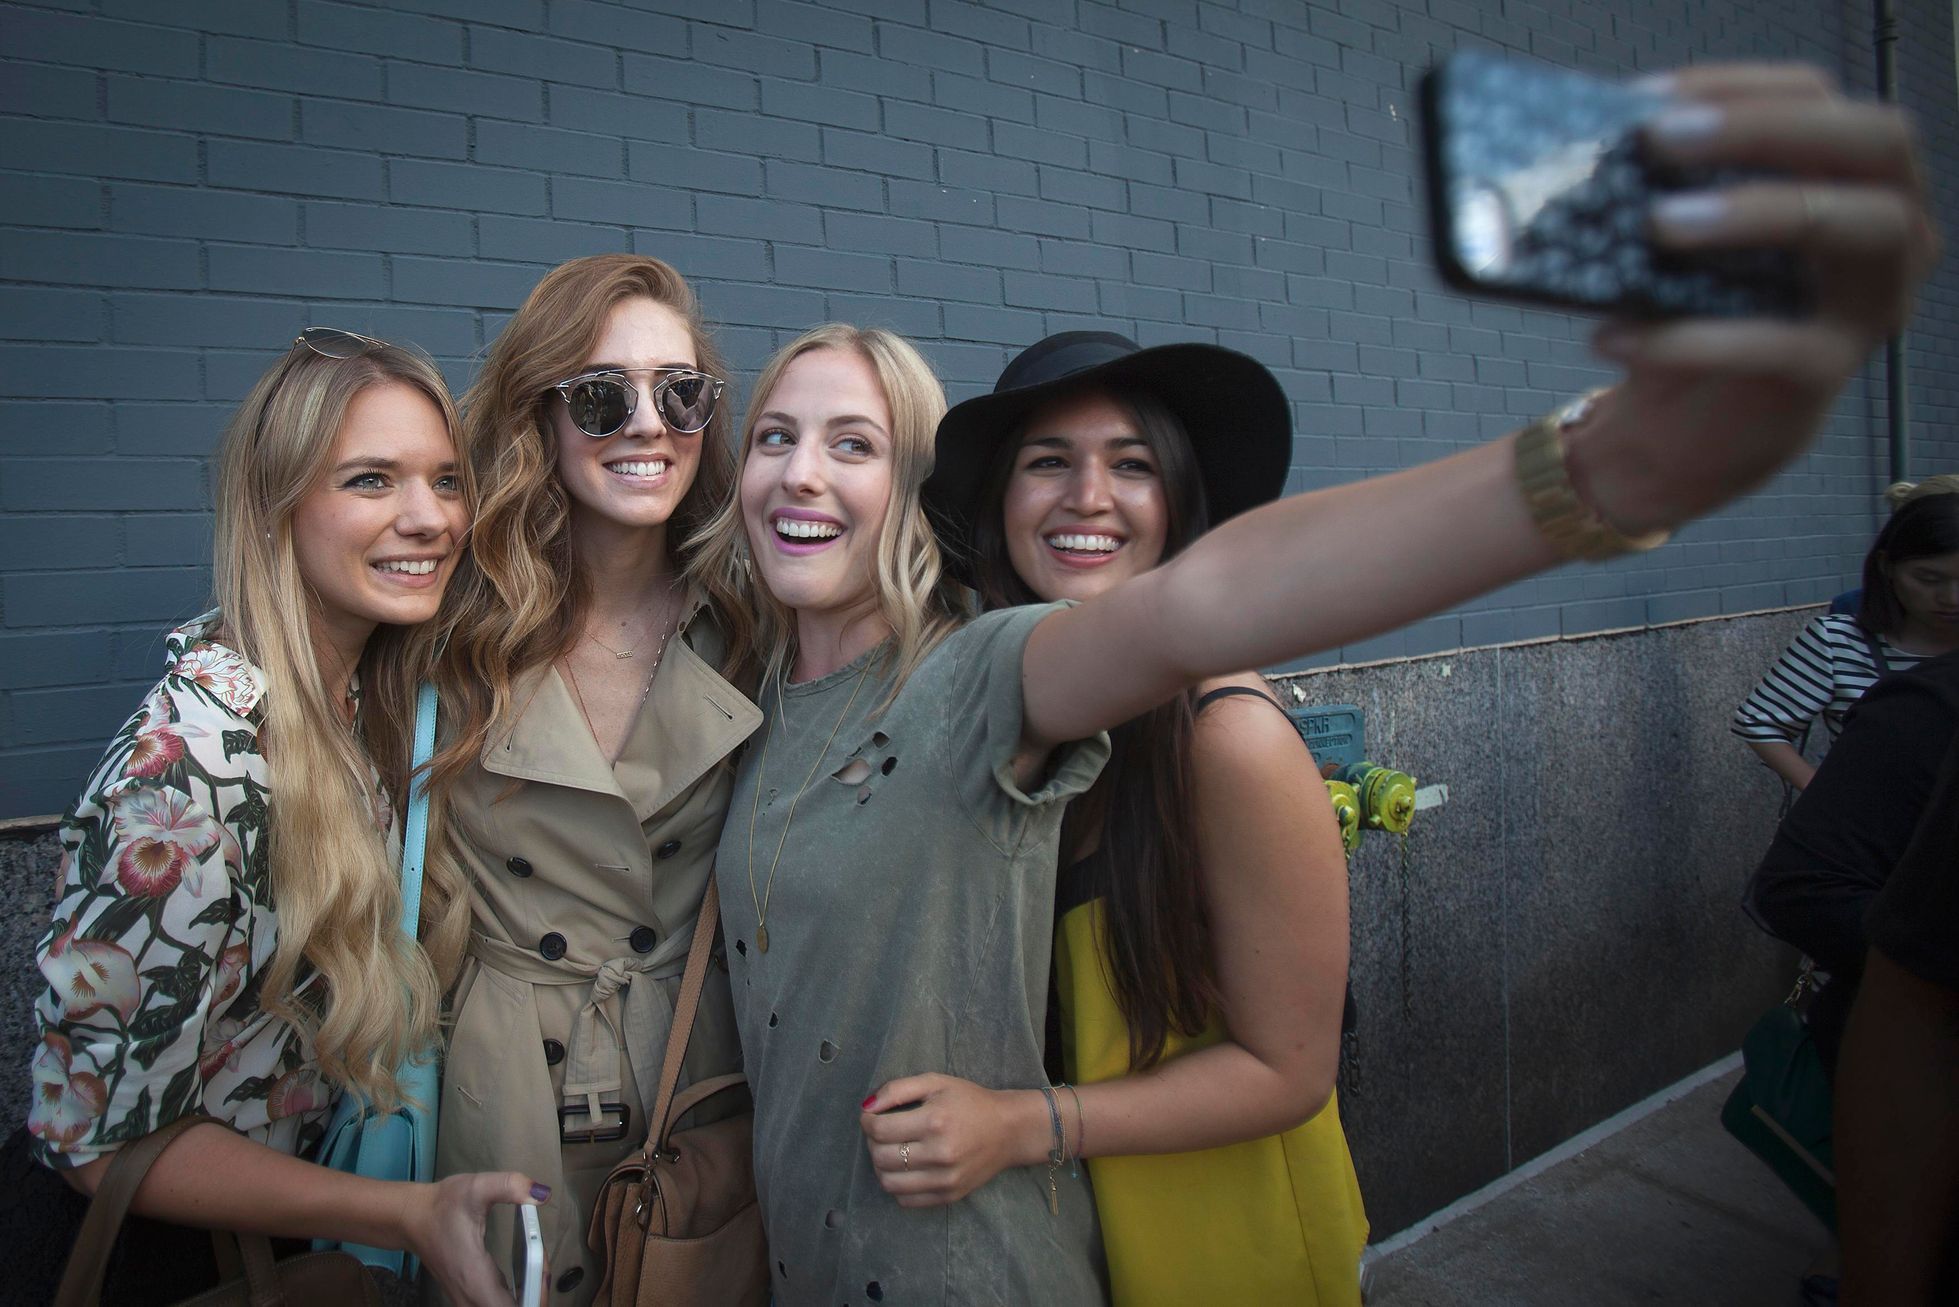 People take a photo following the  Diane von Furstenberg Spring/Summer 2015 collection show during New York Fashion Week